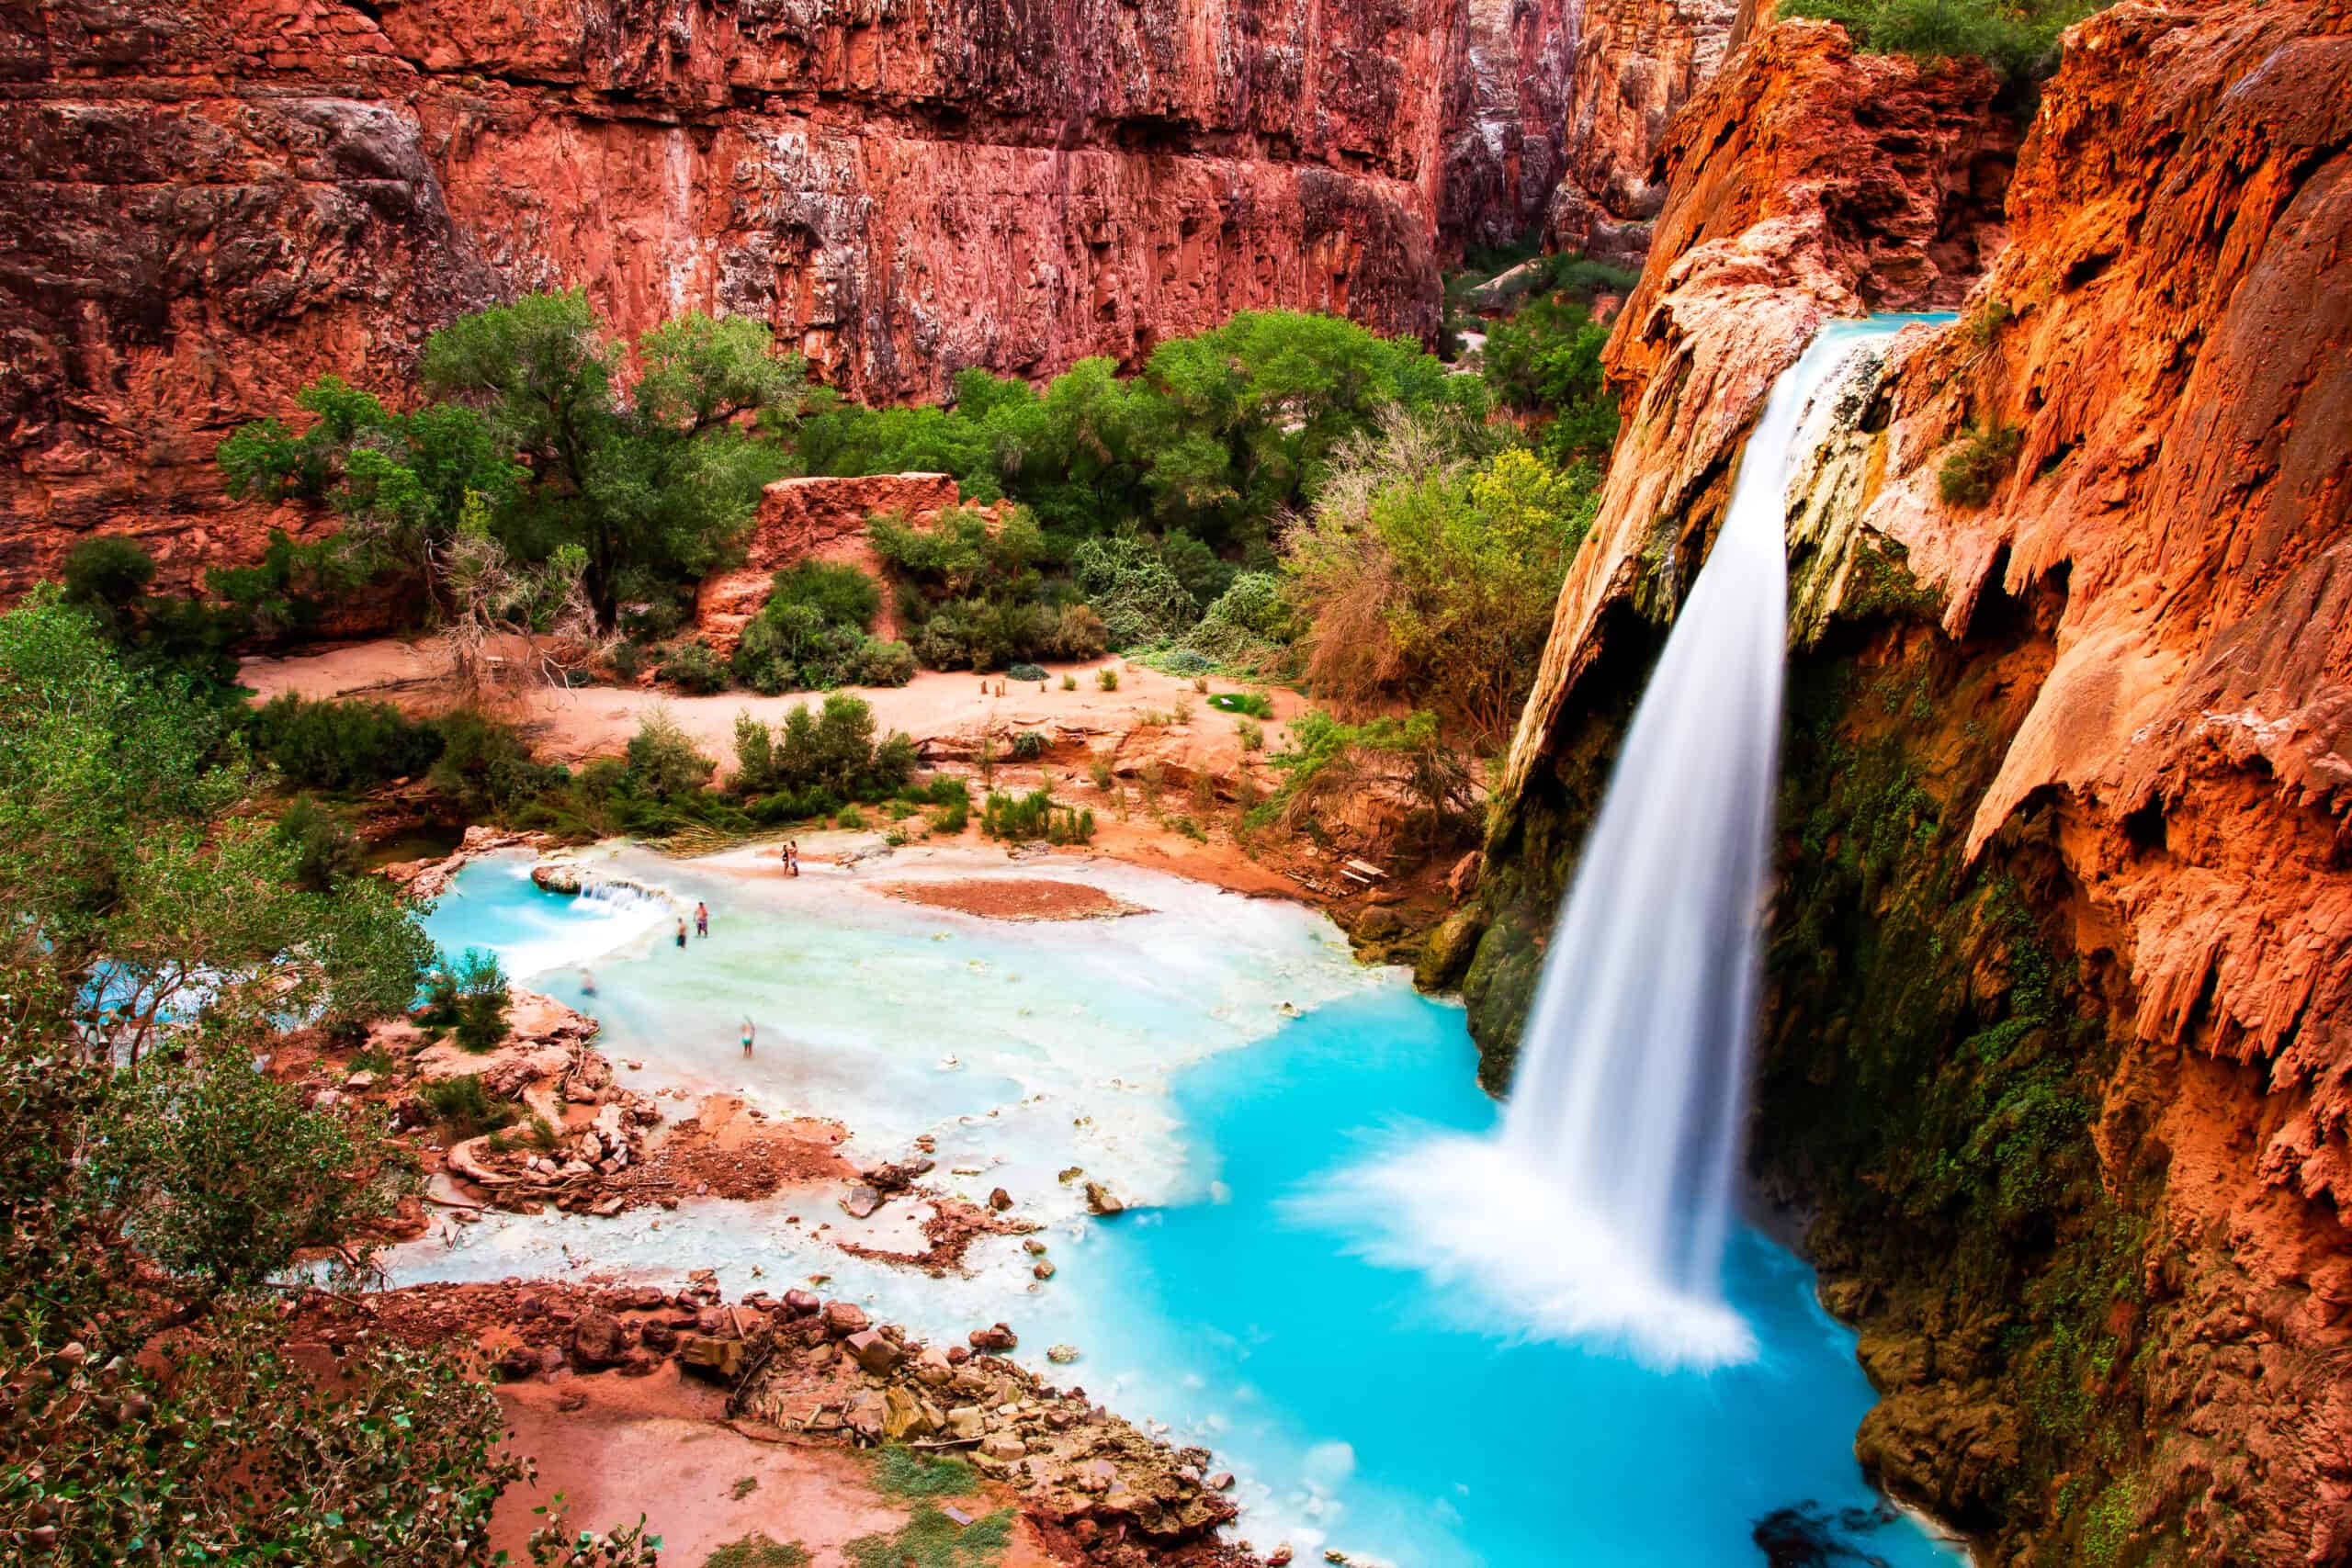 <p>Nestled within the Havasupai Reservation, Havasu Falls is famous for its dazzling blue-green waters that create an amazing contrast against the red rock canyon. Dropping around 100 feet into picturesque turquoise pools, this iconic waterfall is a must-see in the Grand Canyon region. </p> <p>A permit is required to visit, and the 10-mile hike to reach the falls adds an adventurous twist to your summer travels. The effort is well worth it, as Havasu Falls offers unparalleled natural beauty and a deep connection to the cultural heritage of the Havasupai people.</p>